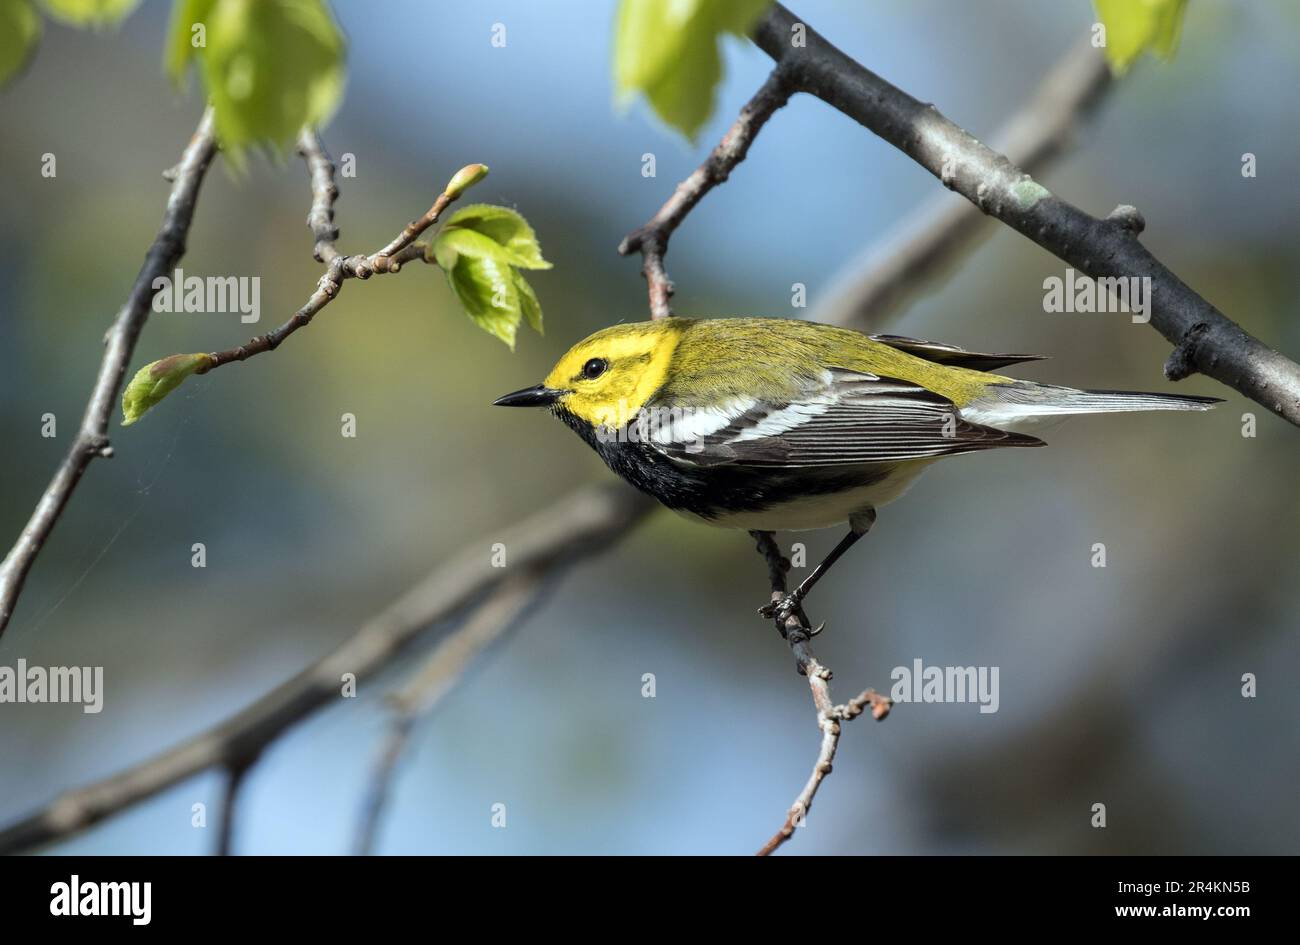 Closeup of Black-throated Green Warbler perching on a leafy branch during spring migration, Ontario, Canada. Scientific name is Dendroica virens Stock Photo